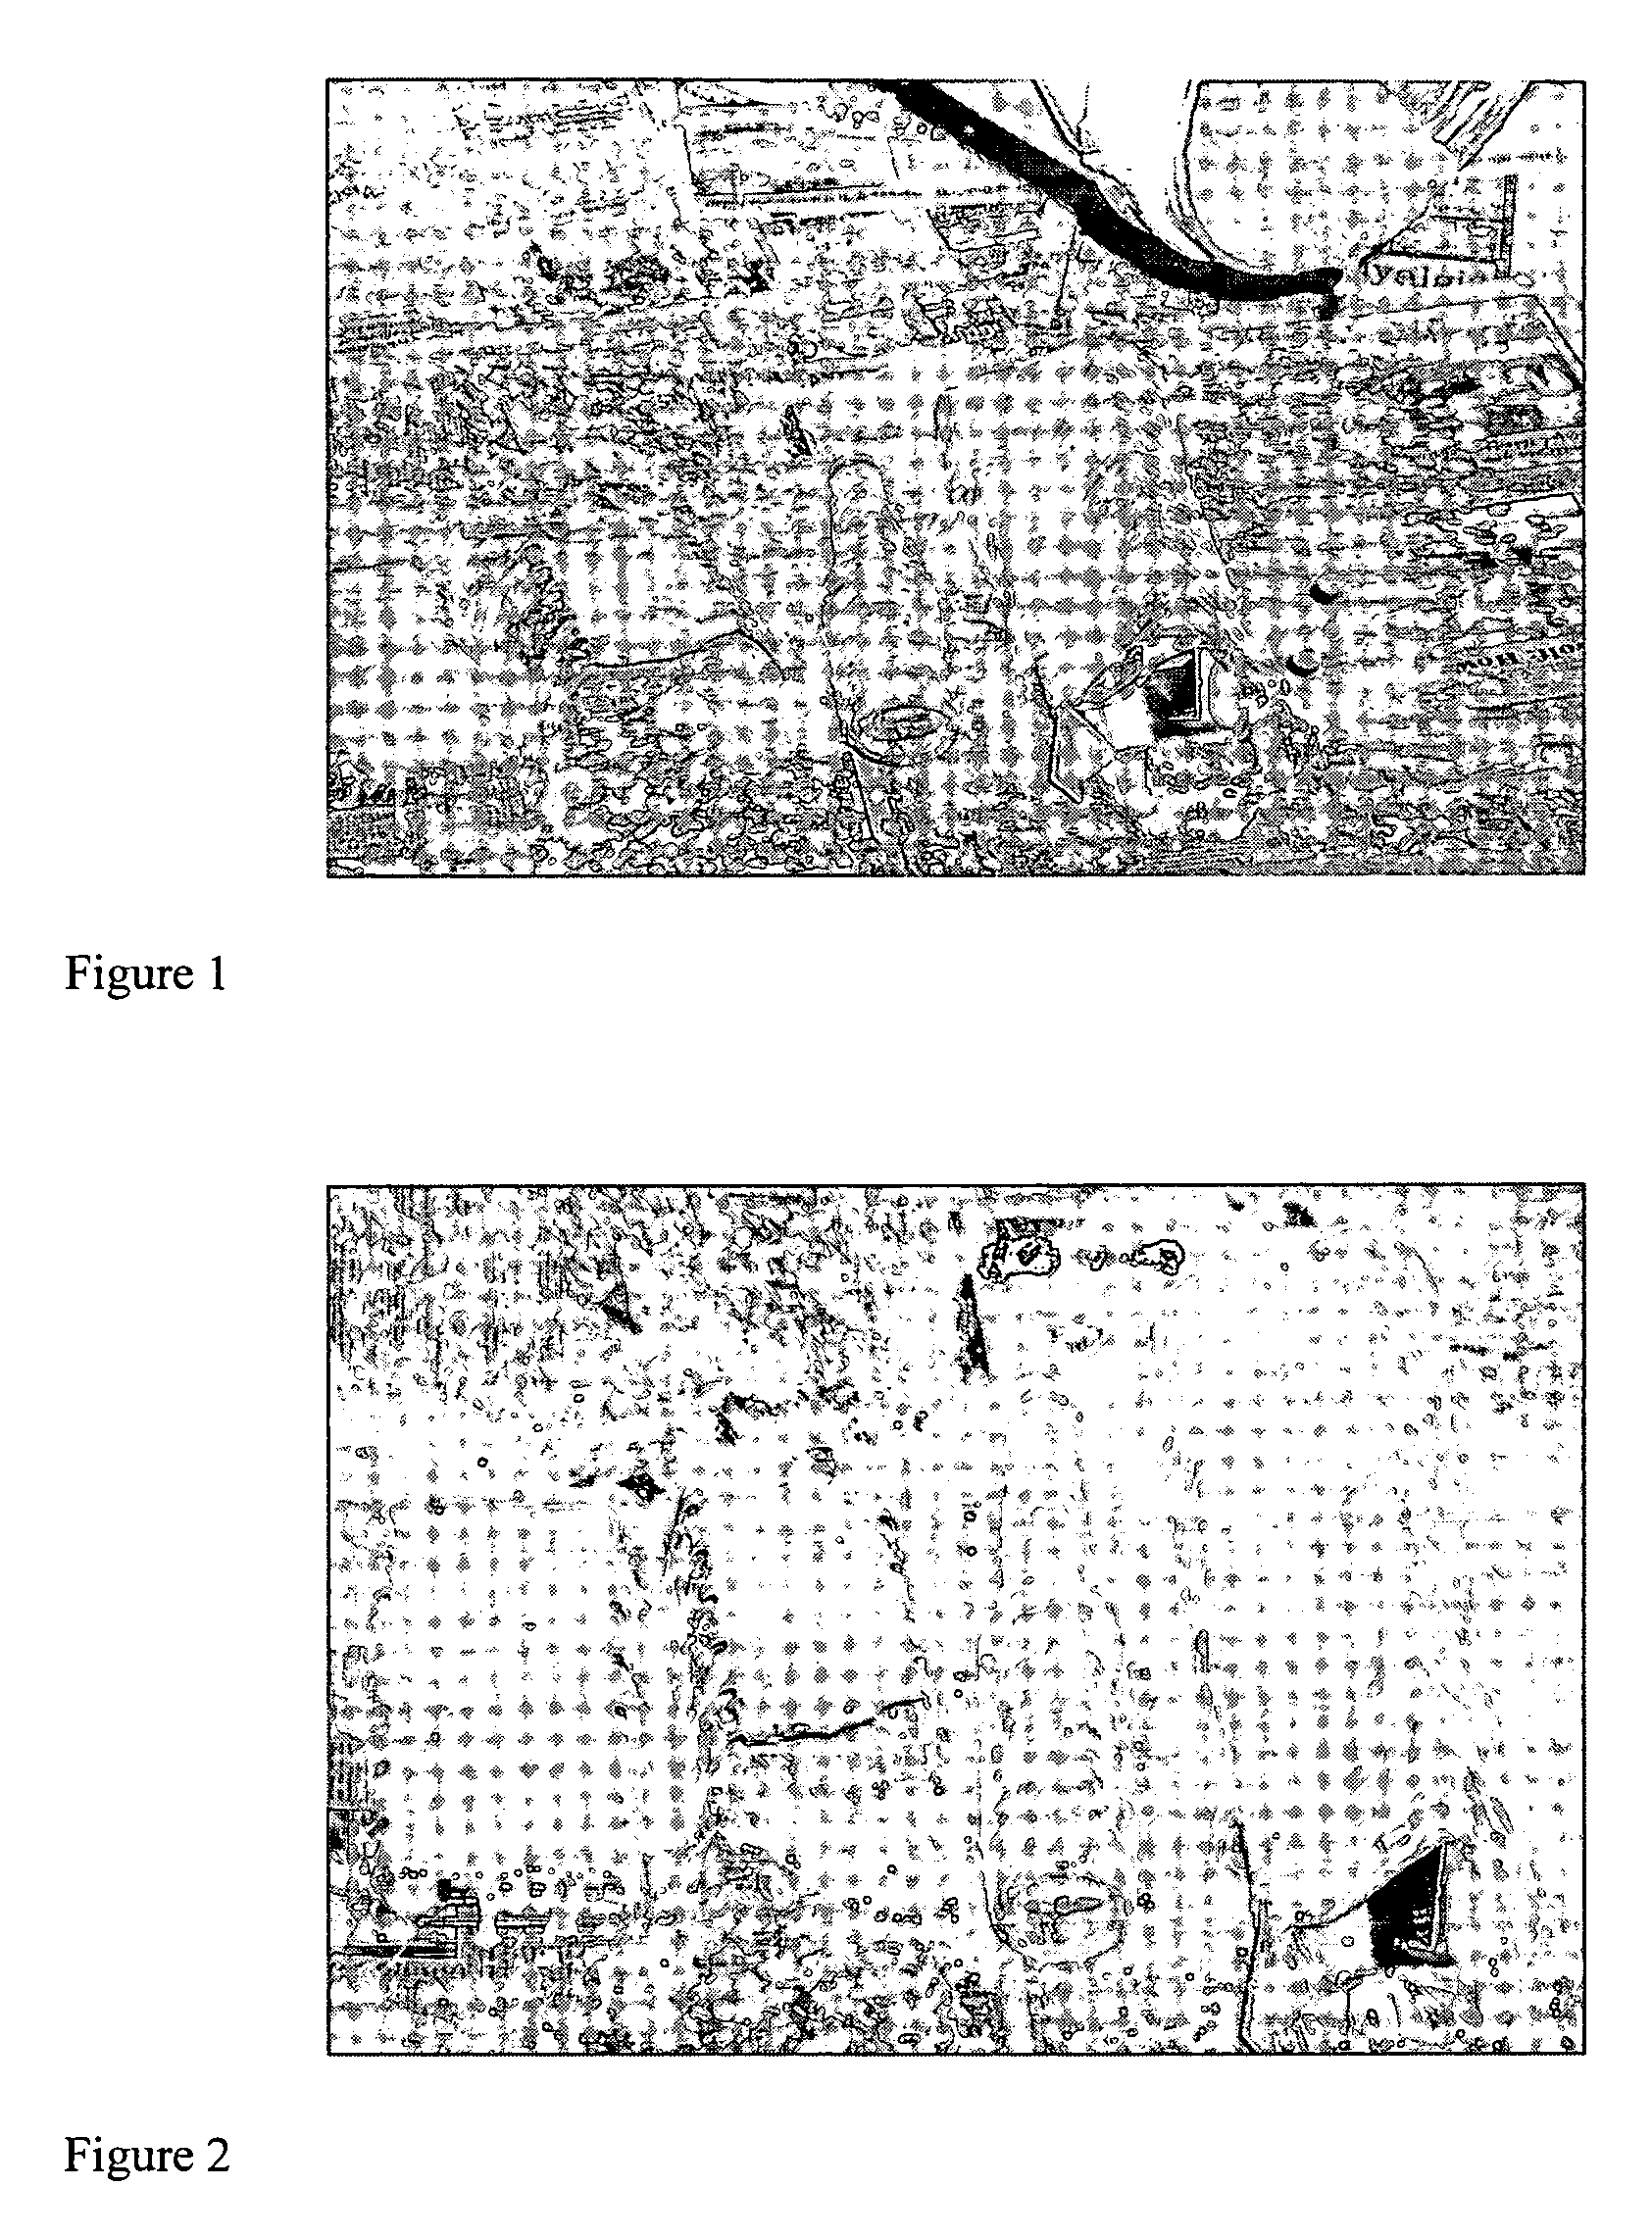 Composition and method for forming a sprayable materials cover